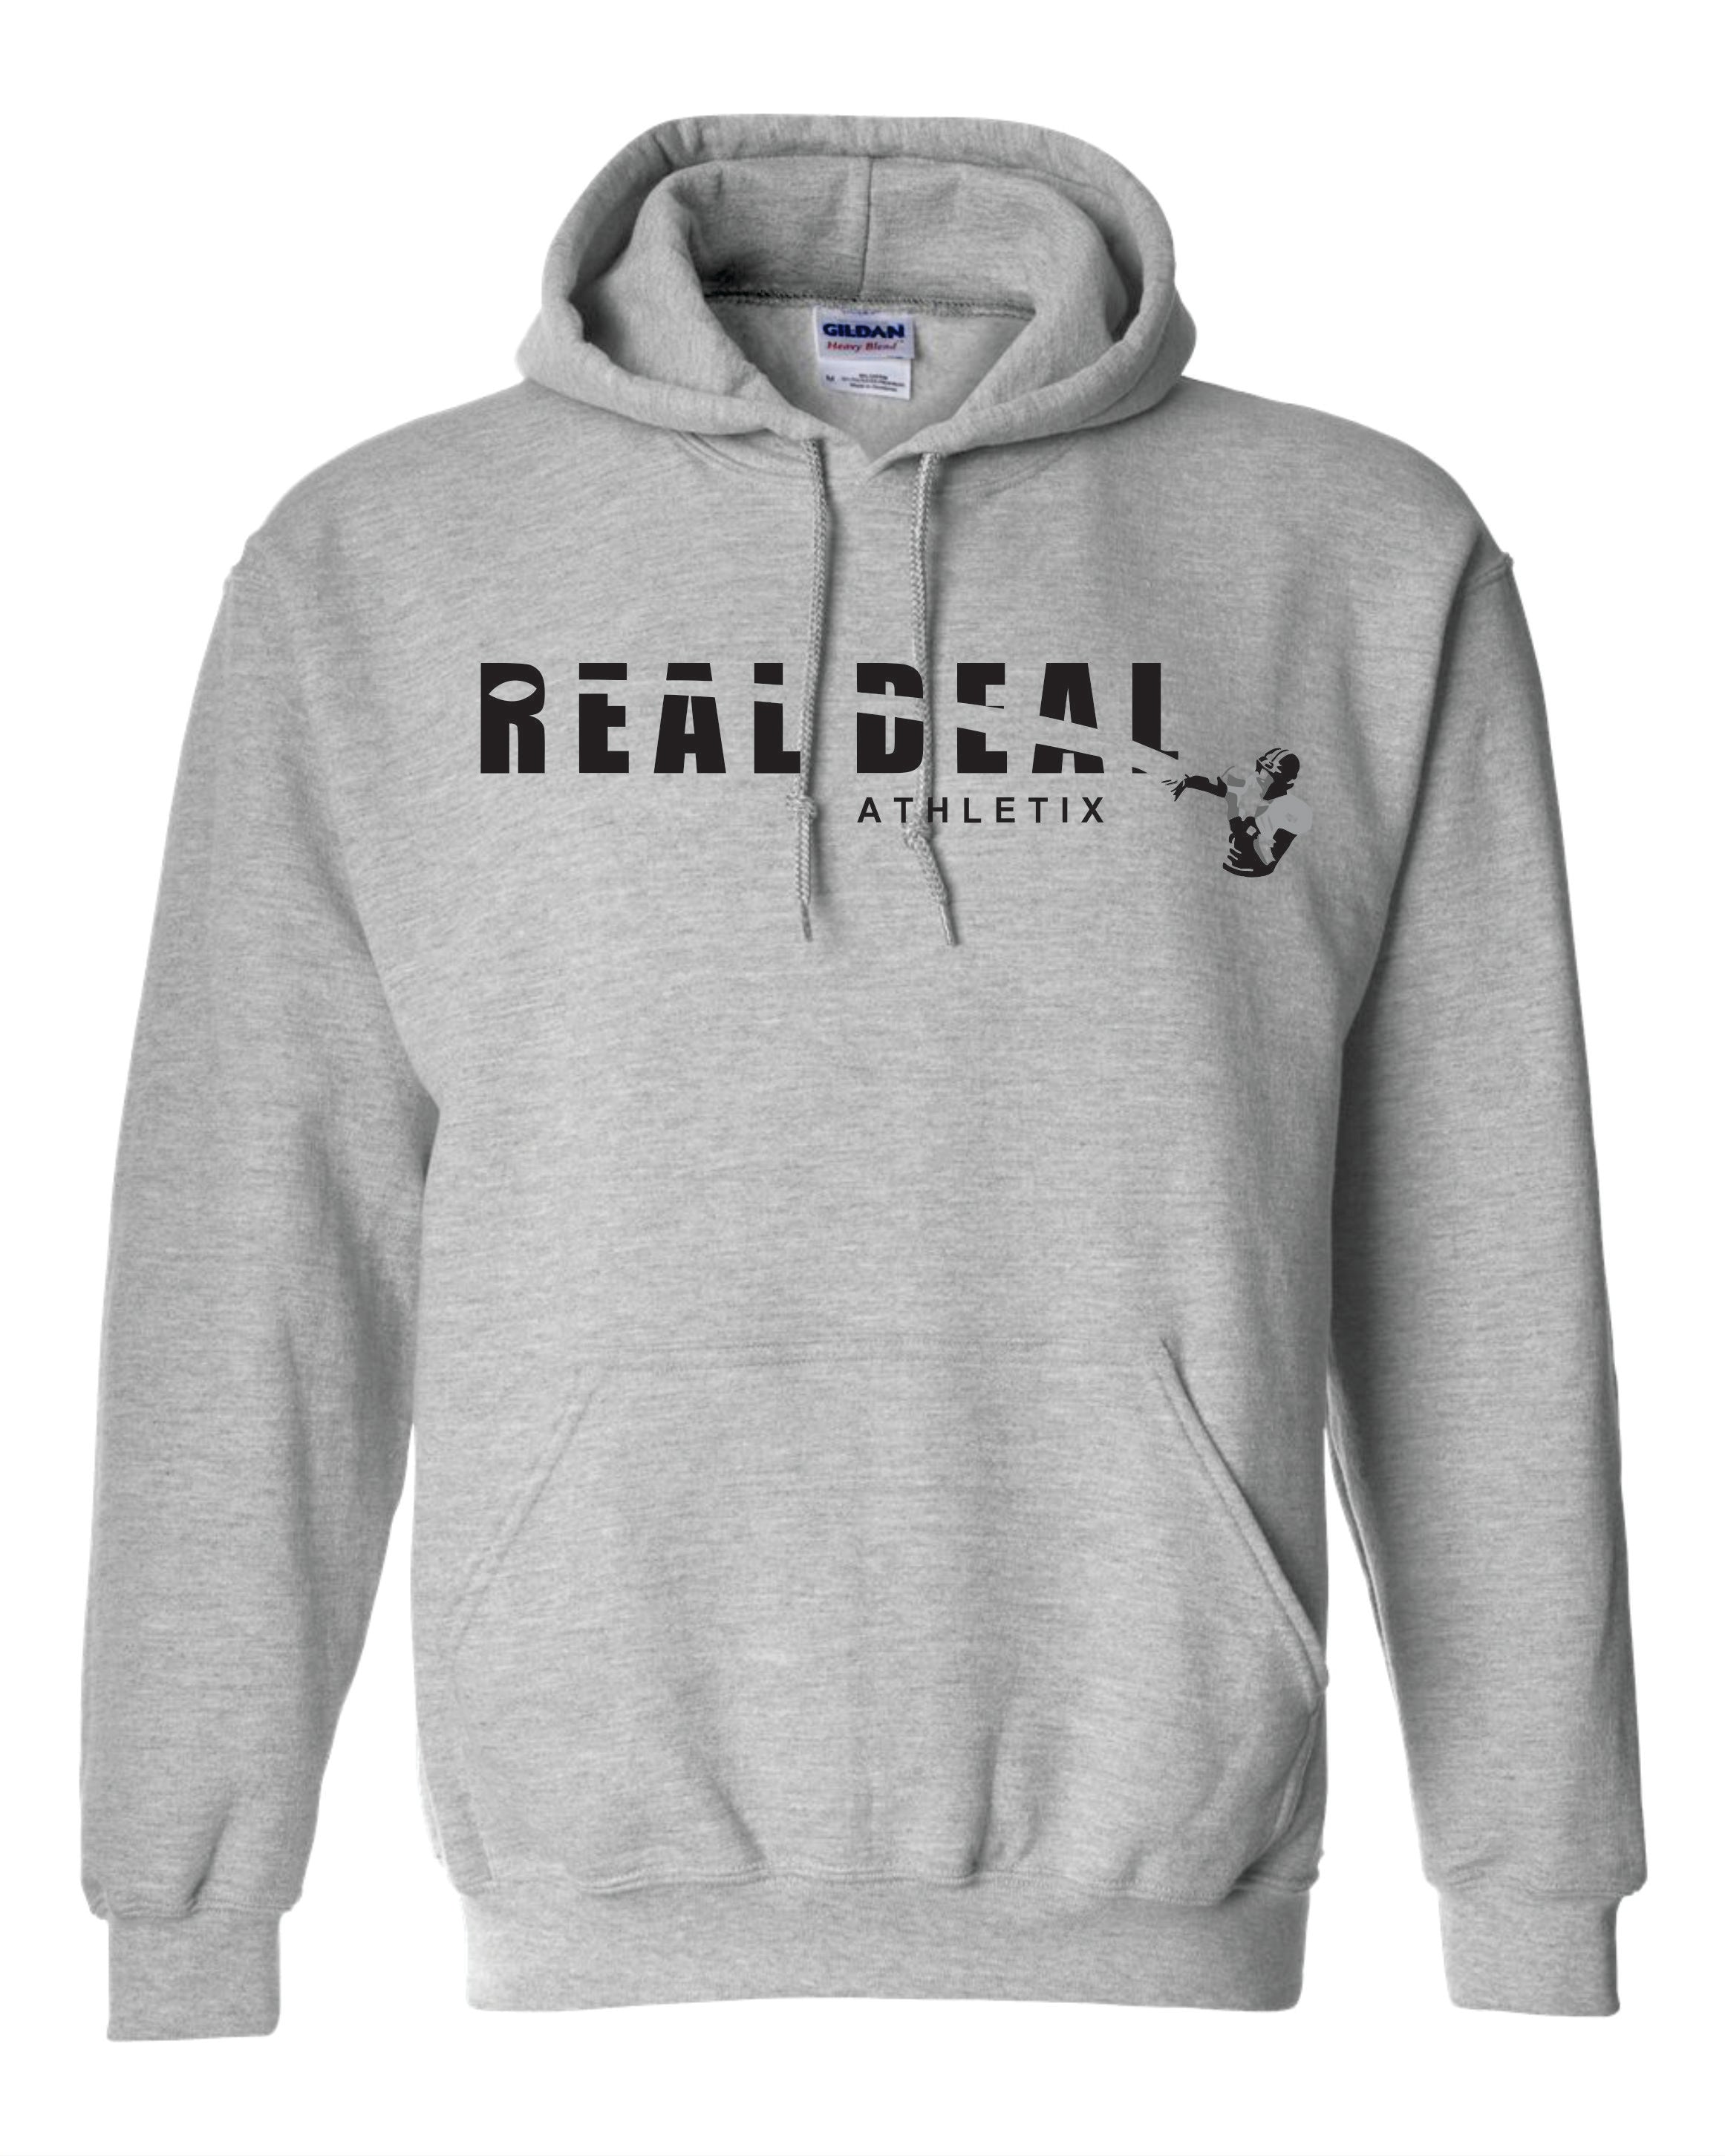 Real Deal Cotton Poly blend 50/50 Hoodie YOUTH